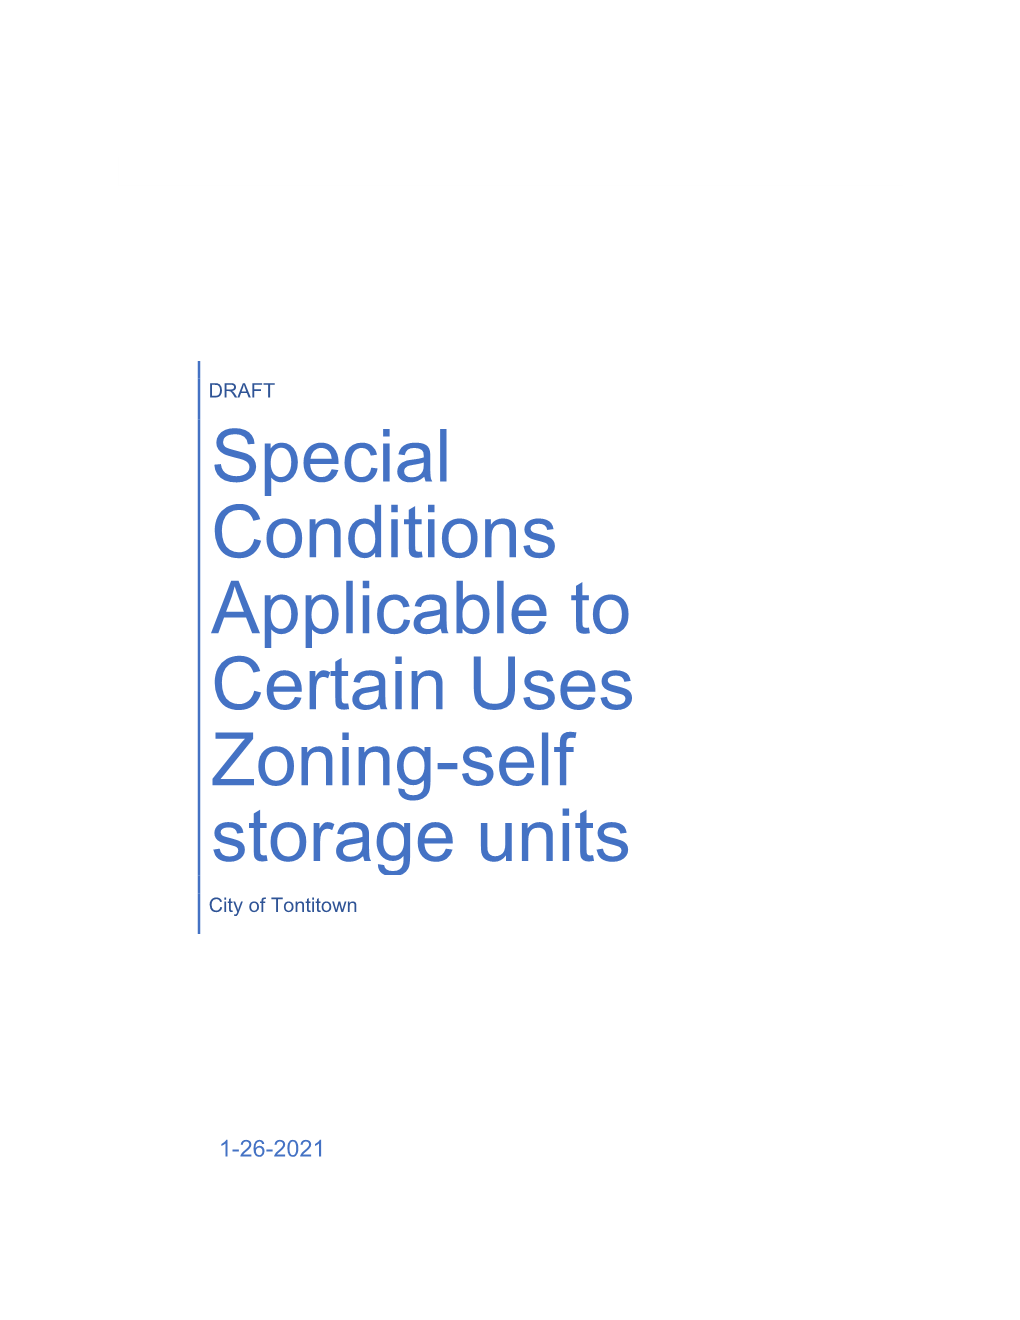 Special Conditions Applicable to Certain Uses Zoning-Self Storage Units City of Tontitown